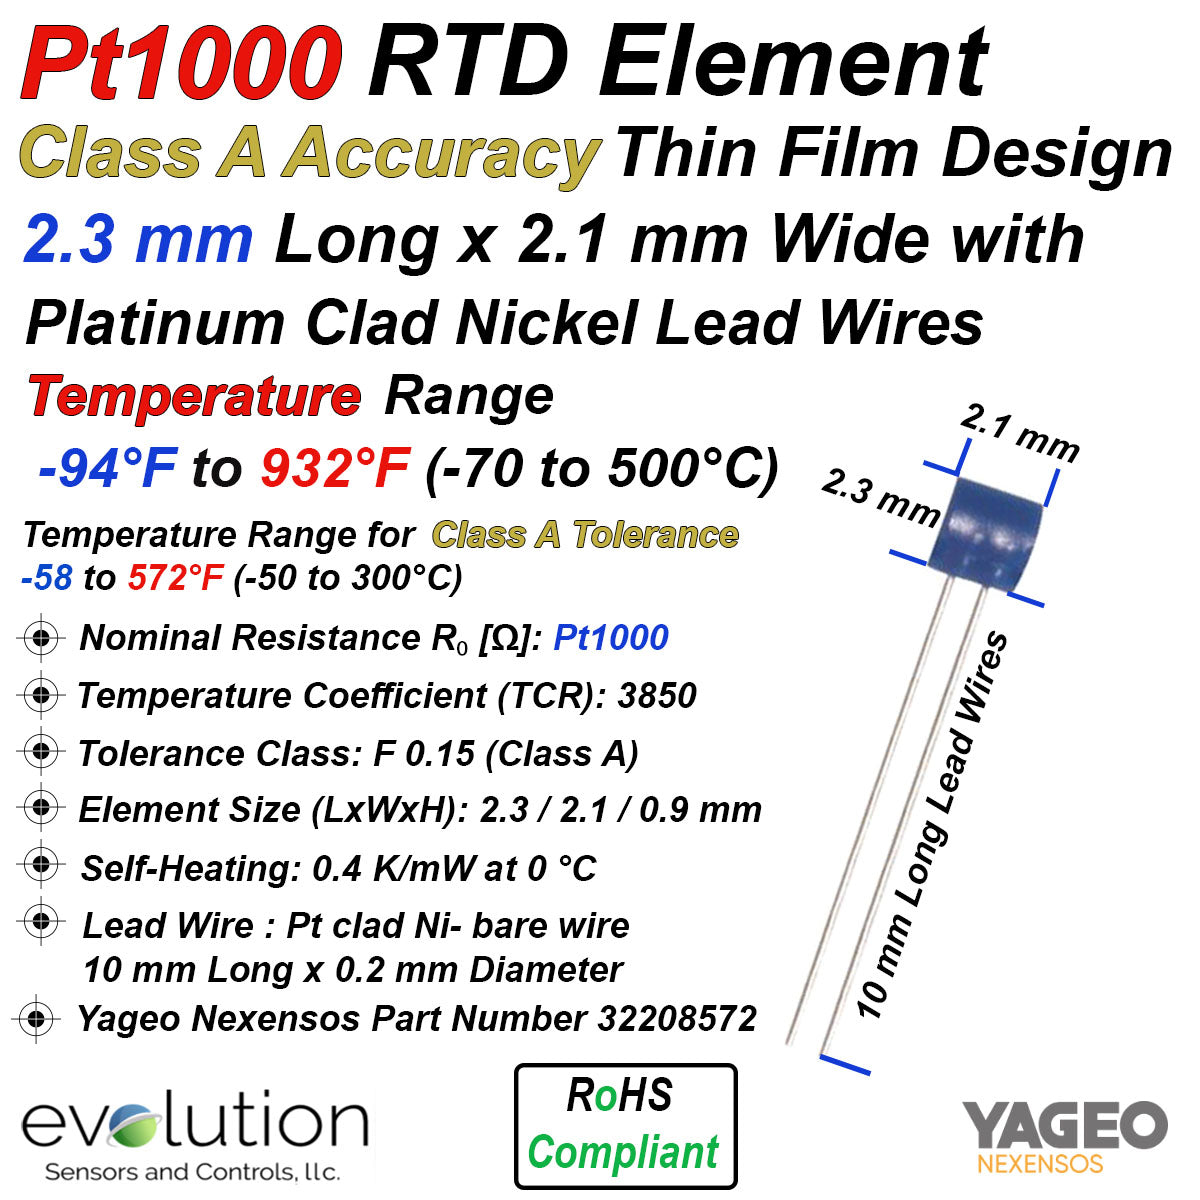 Pt1000 RTD Thin Film Element Class A with -70 to 500°C Temperature Range -  Dimensions 2.3mm Long x 2.1 mm Wide with 10 mm Long Platinum Clad Nickel